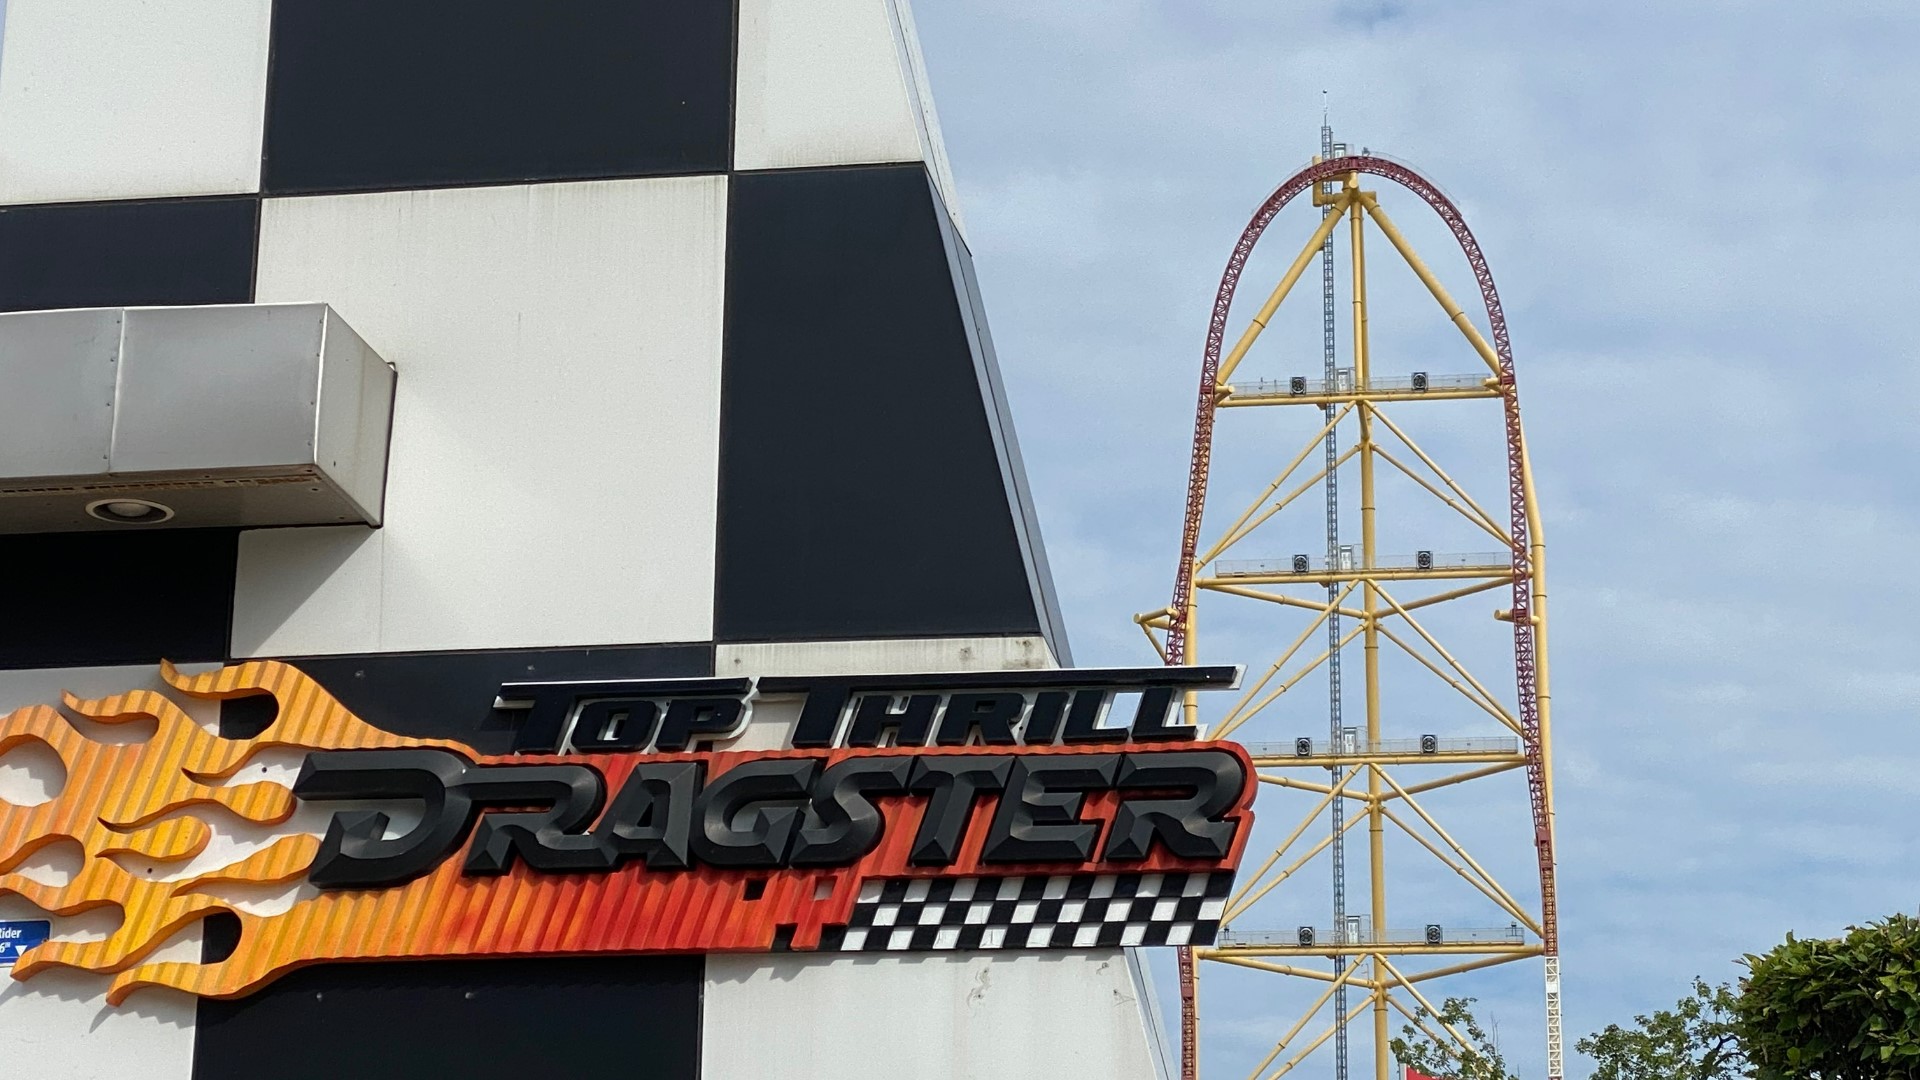 The record-setting roller coaster opened in 2003 and has been closed since August 2021 after a woman was injured waiting in line.